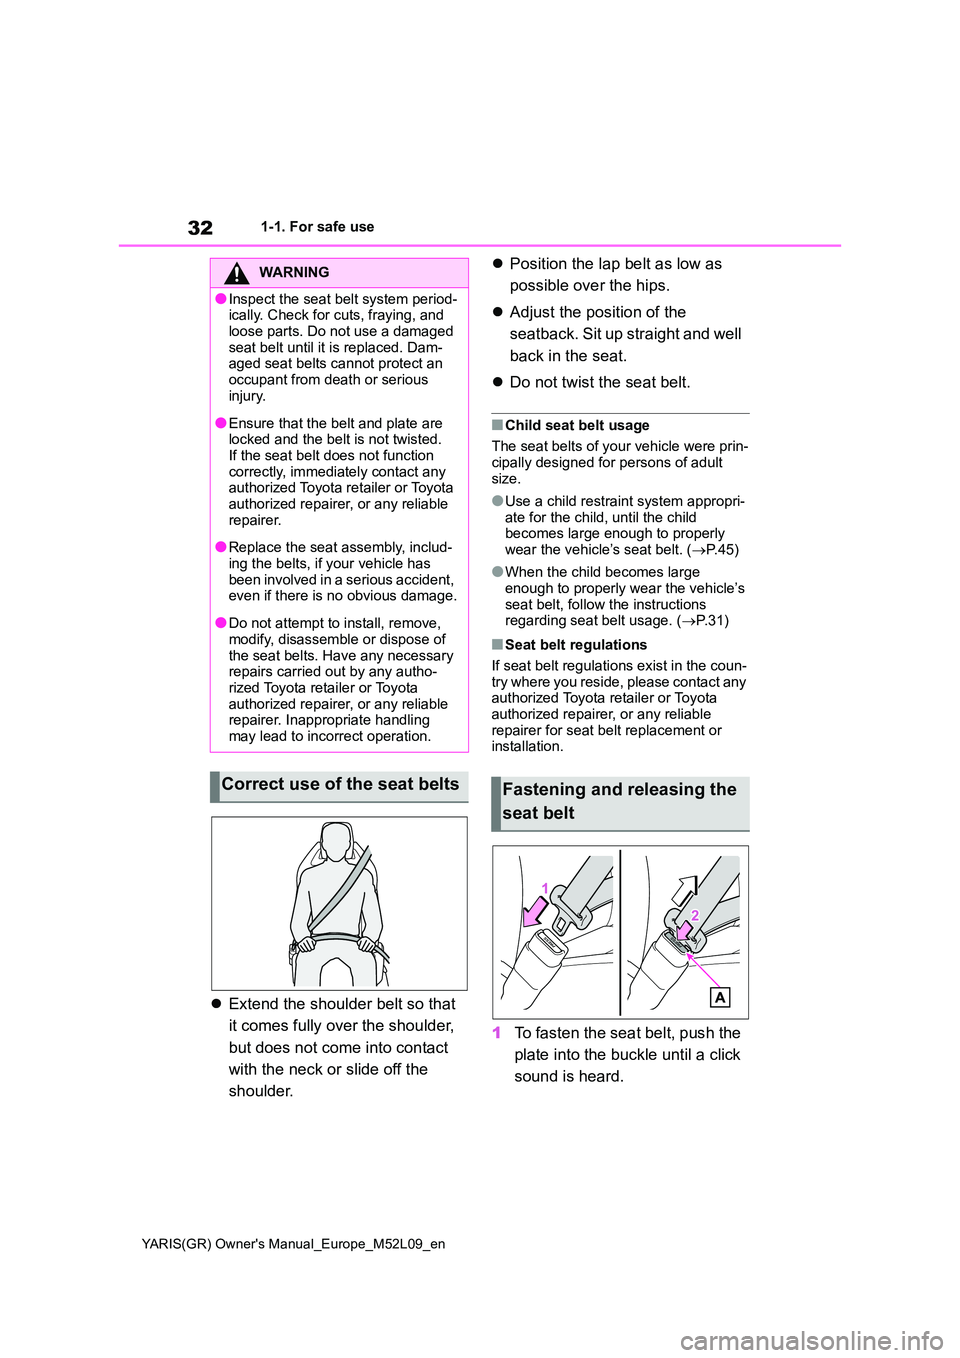 TOYOTA GR YARIS 2020  Owners Manual 32
YARIS(GR) Owners Manual_Europe_M52L09_en
1-1. For safe use
�zExtend the shoulder belt so that  
it comes fully over the shoulder,  
but does not come into contact  
with the neck or slide off the 